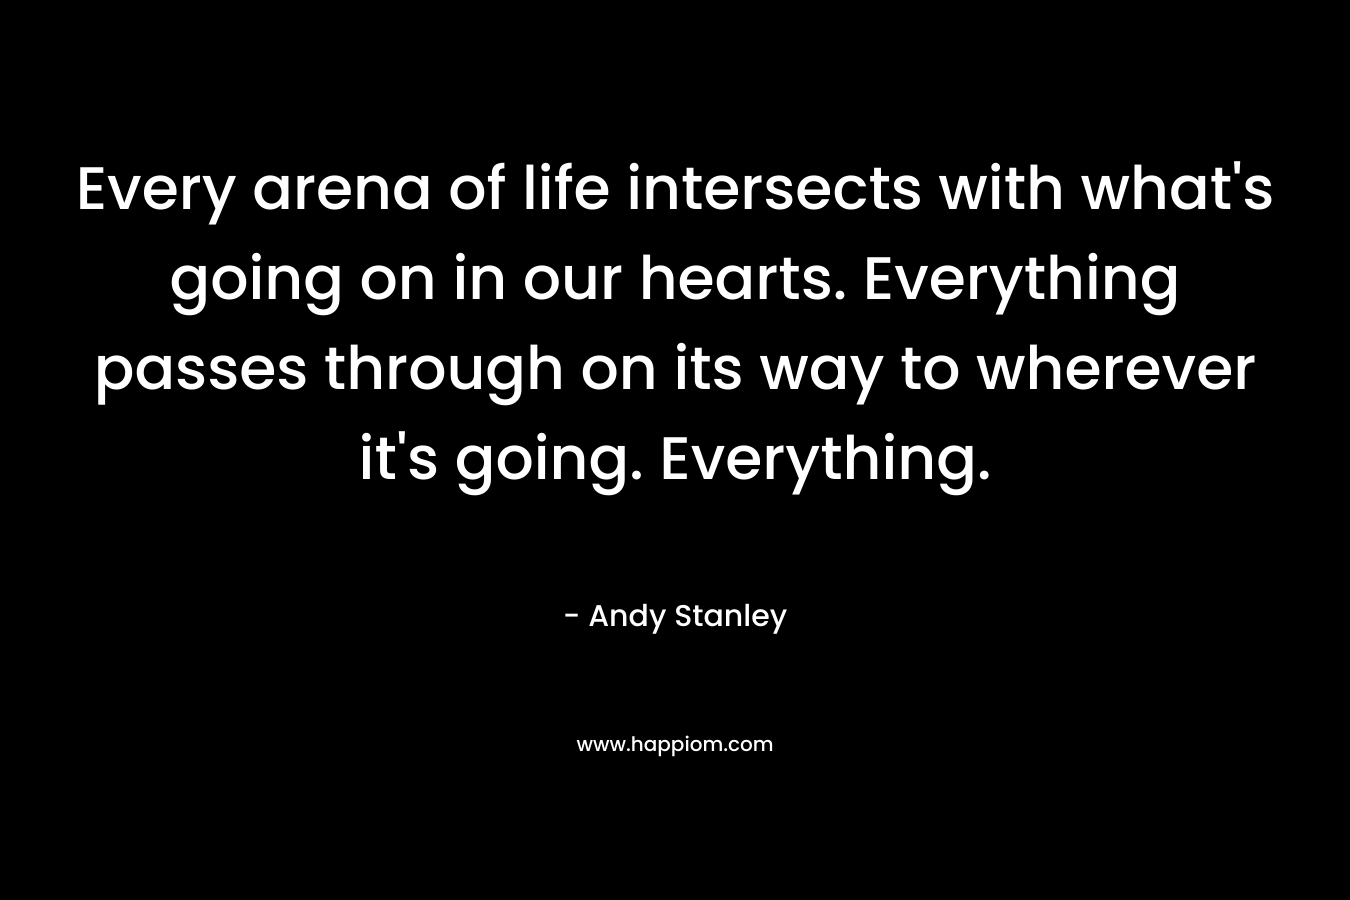 Every arena of life intersects with what's going on in our hearts. Everything passes through on its way to wherever it's going. Everything.